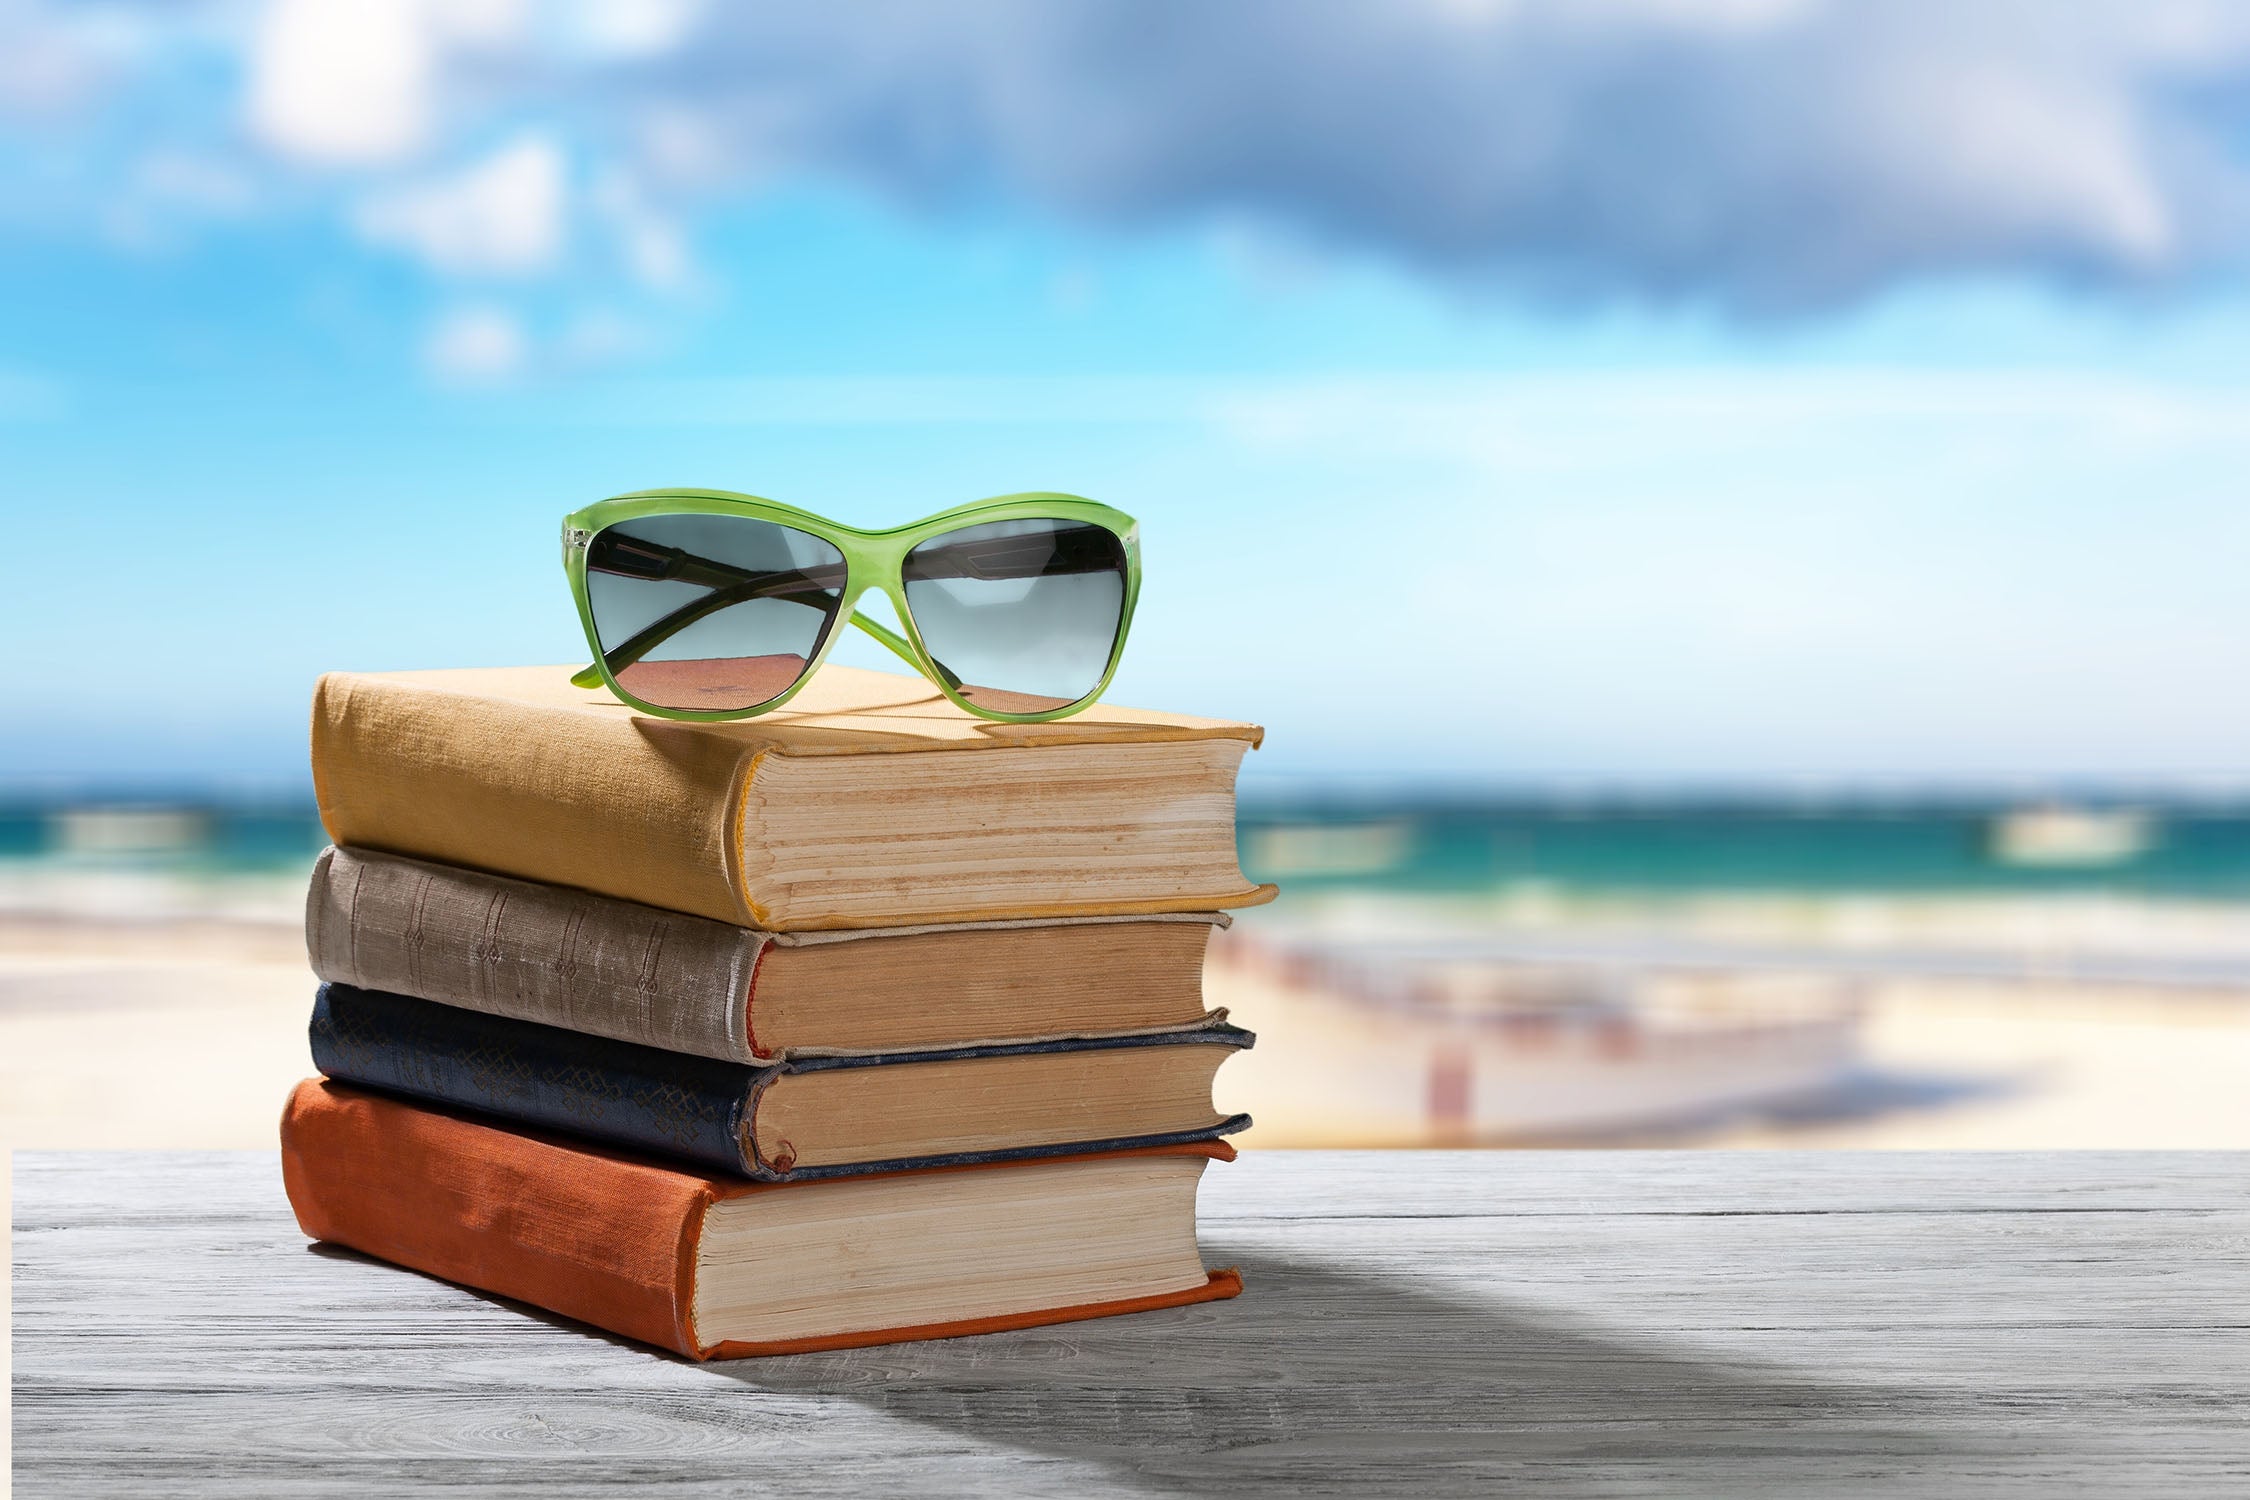 Sunglasses on top of a stack of books at the beach